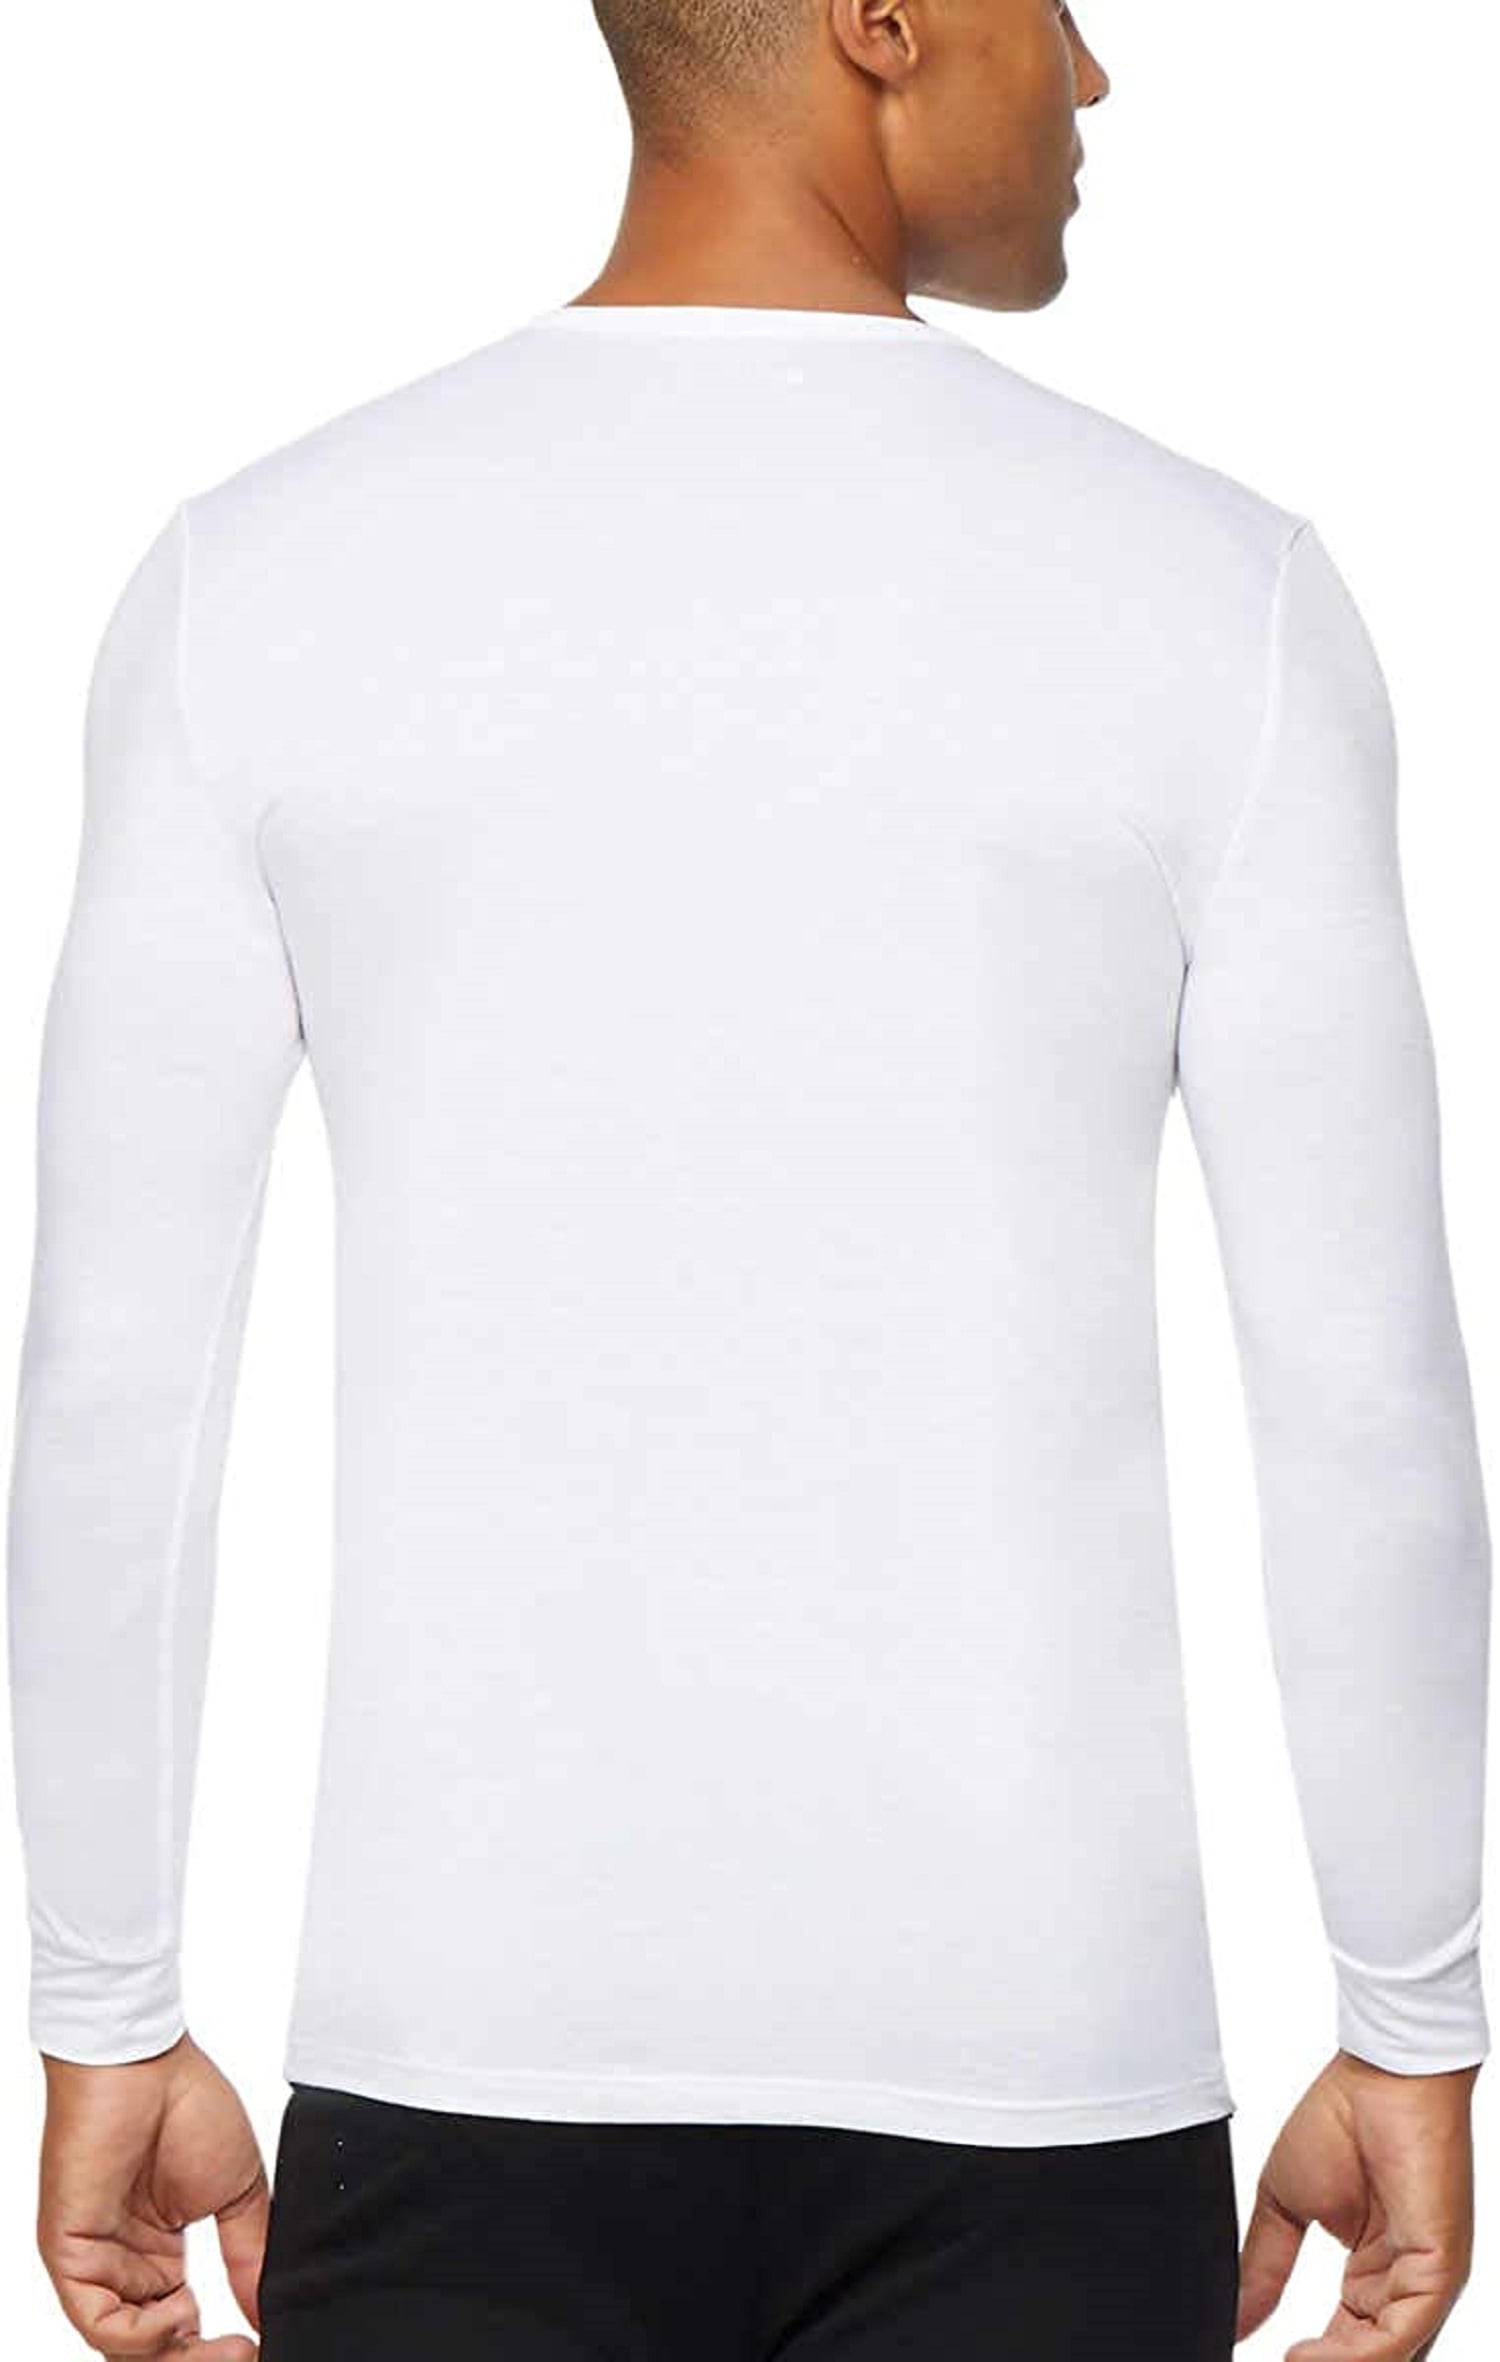 32 Degrees Thermal Athletic Long Sleeve Shirts for Men